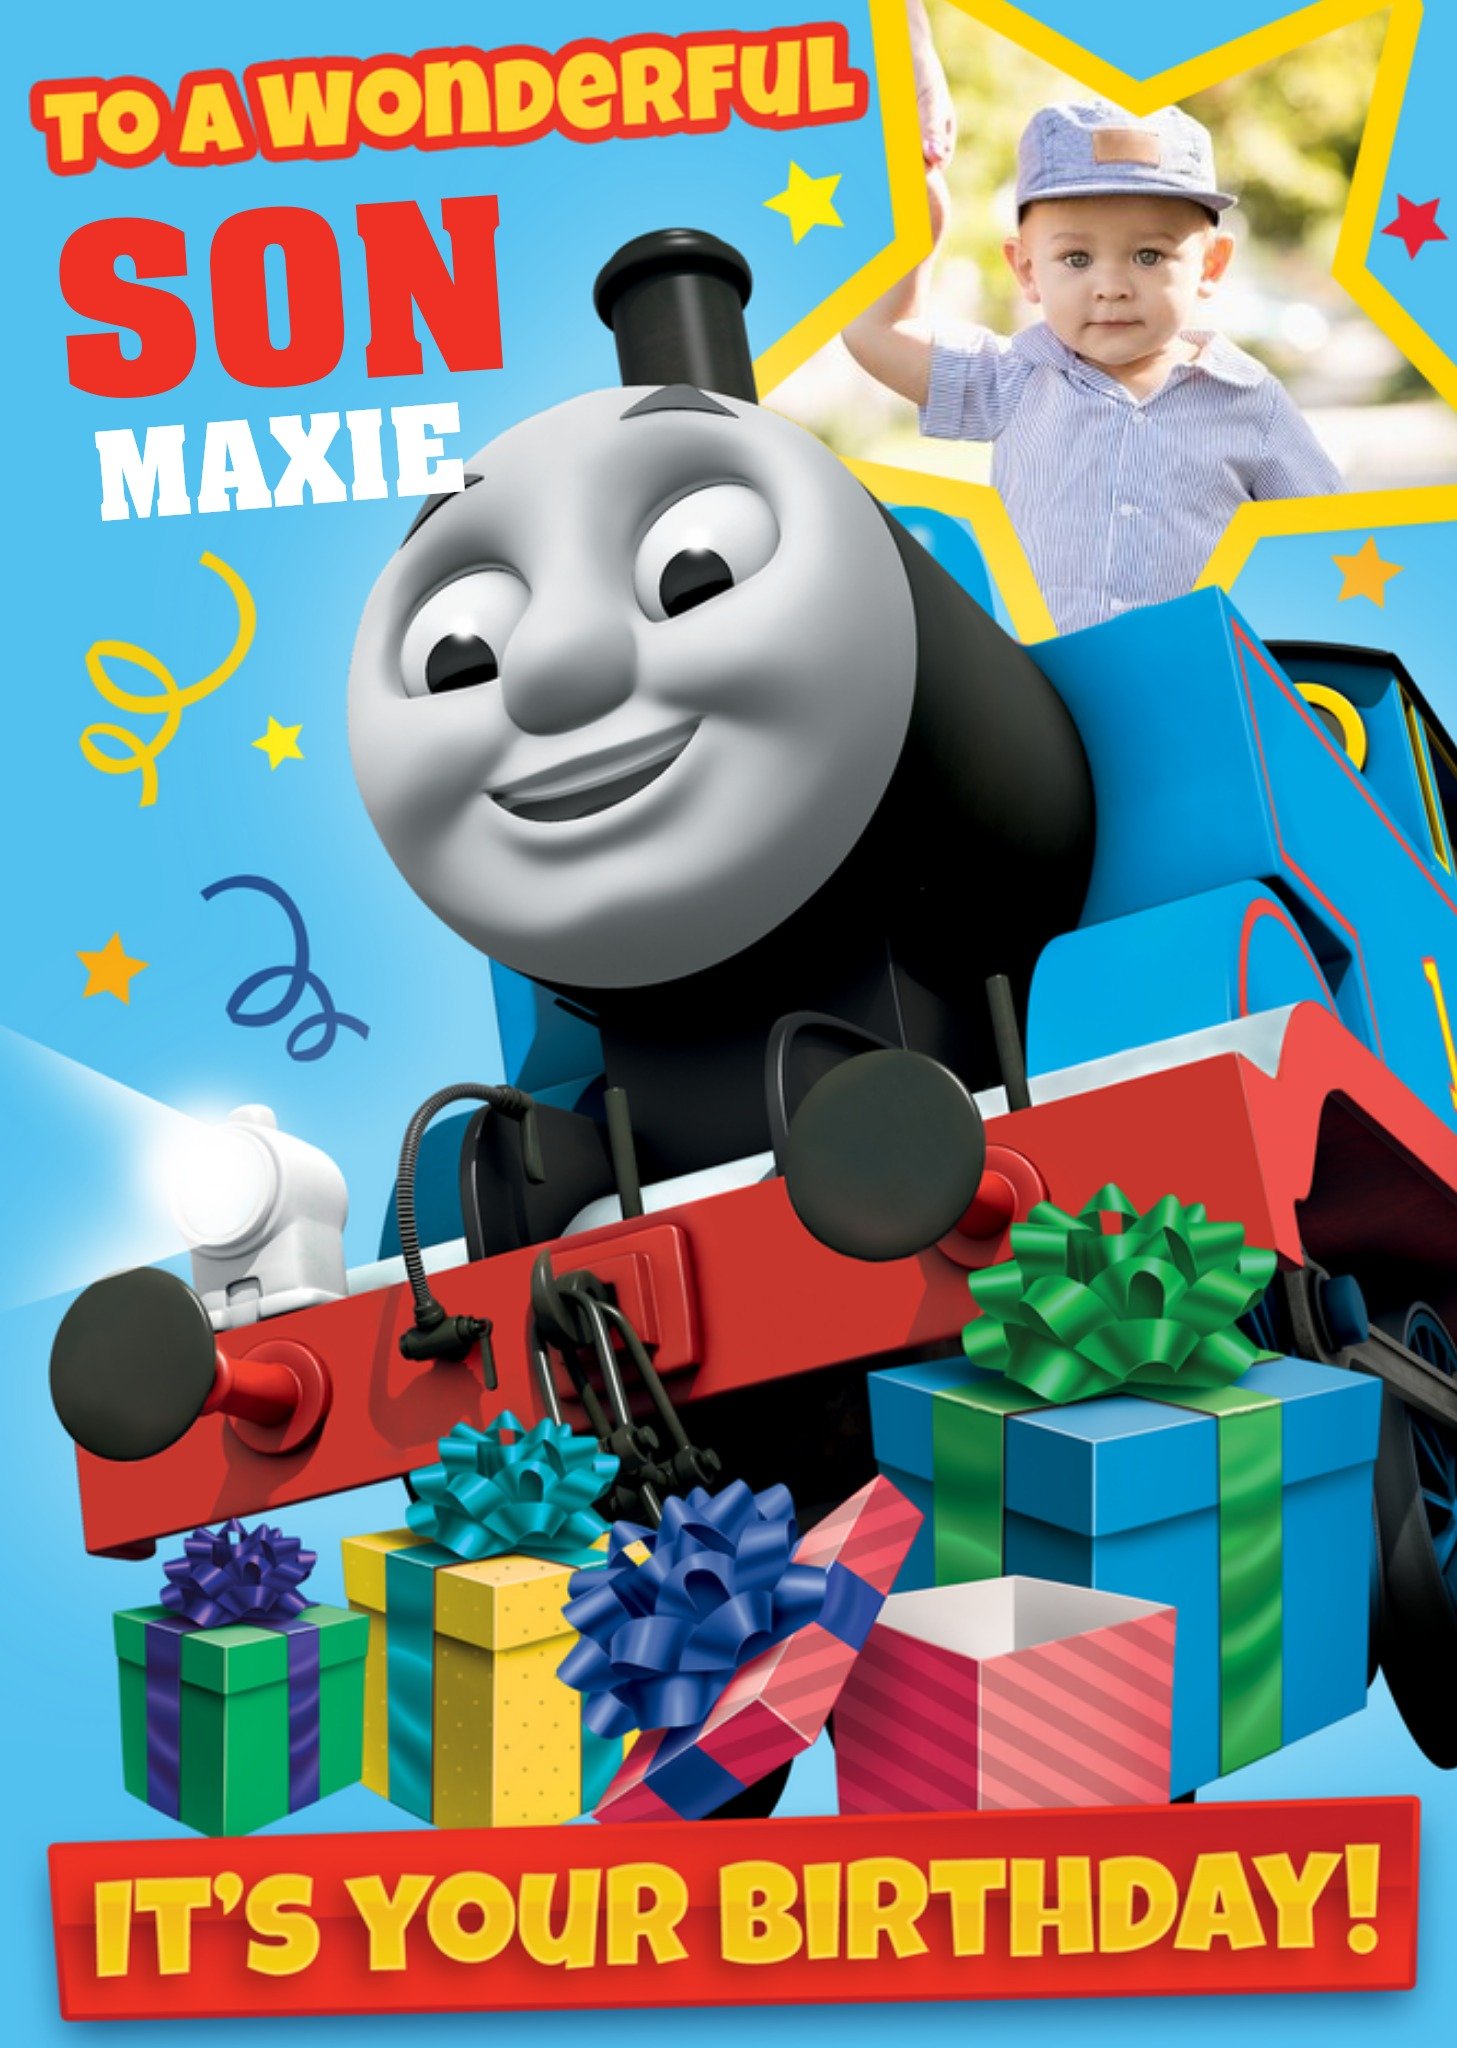 Thomas & Friends Thomas And Friends To A Wonderful Son Birthday Photo Upload Card, Large